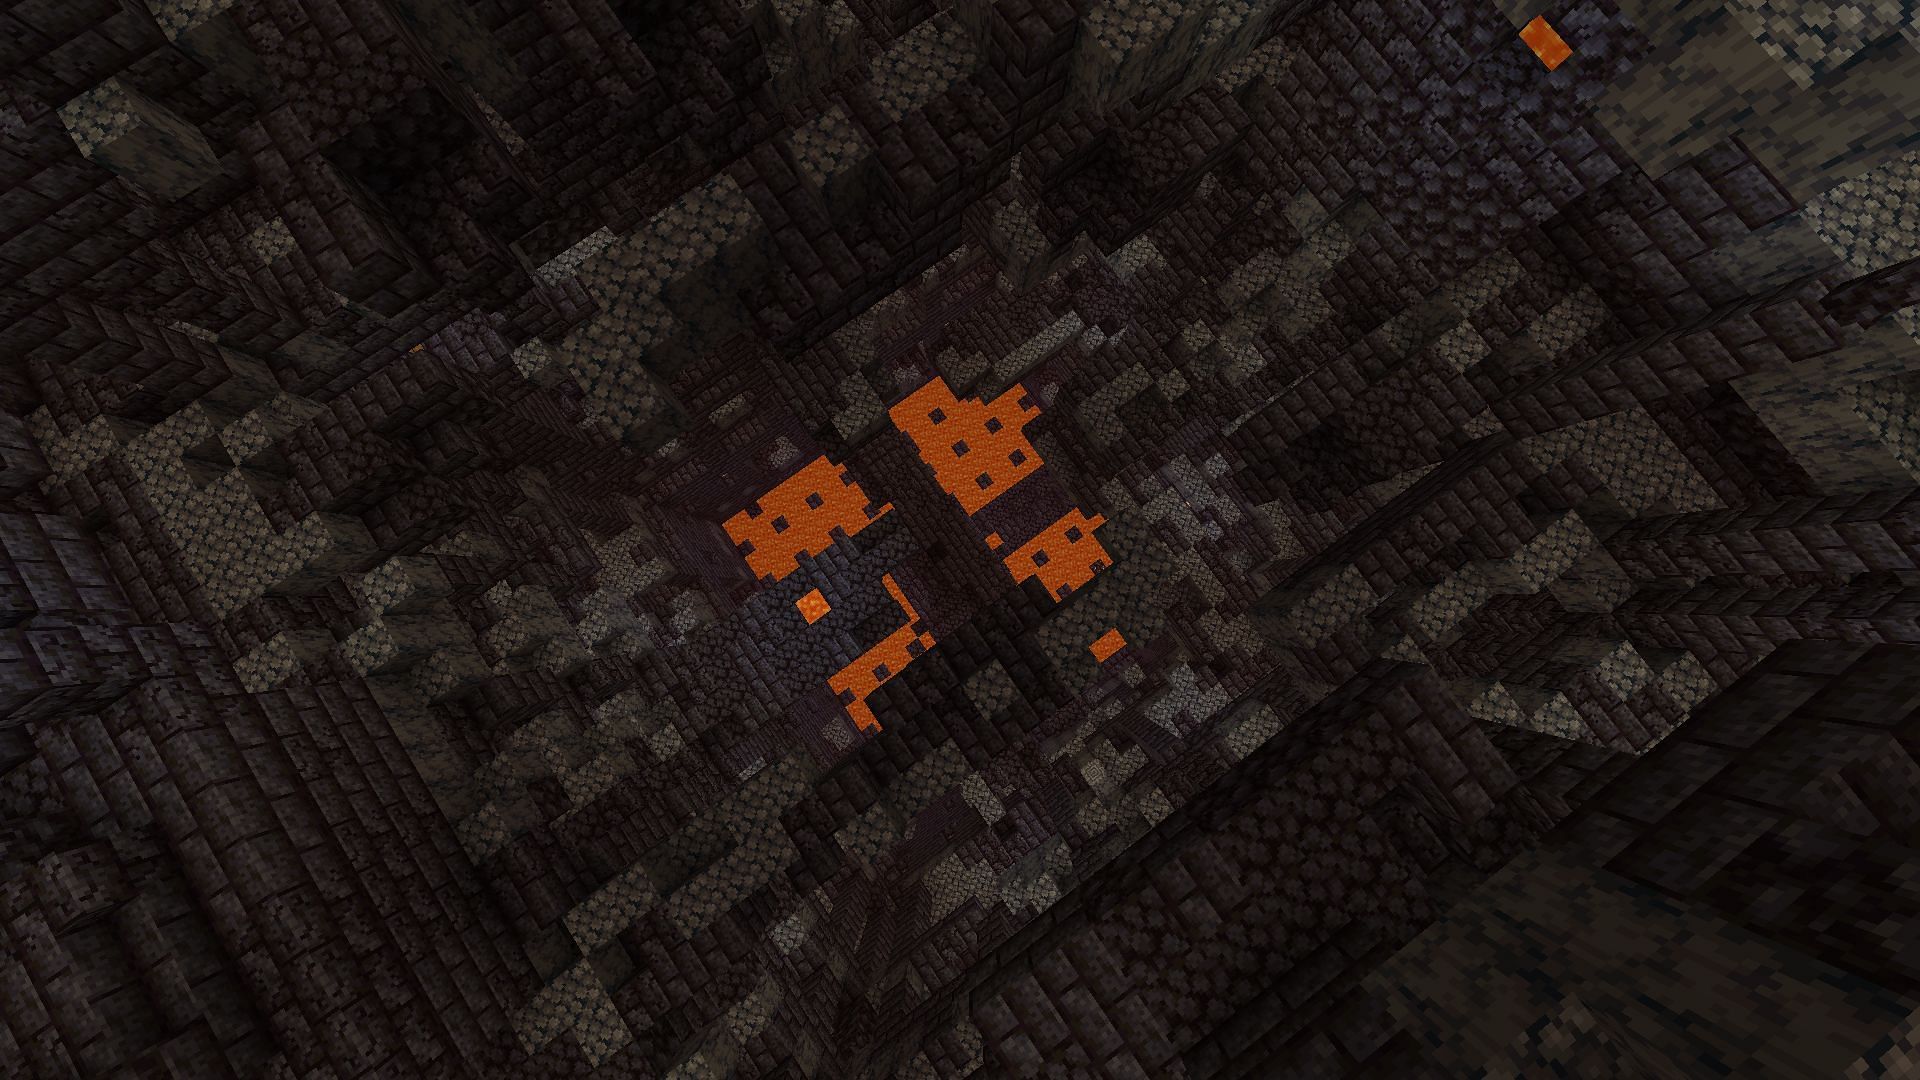 Bastion Remnant variant in which diamonds have a chance to generate in Minecraft (Image via Mojang)